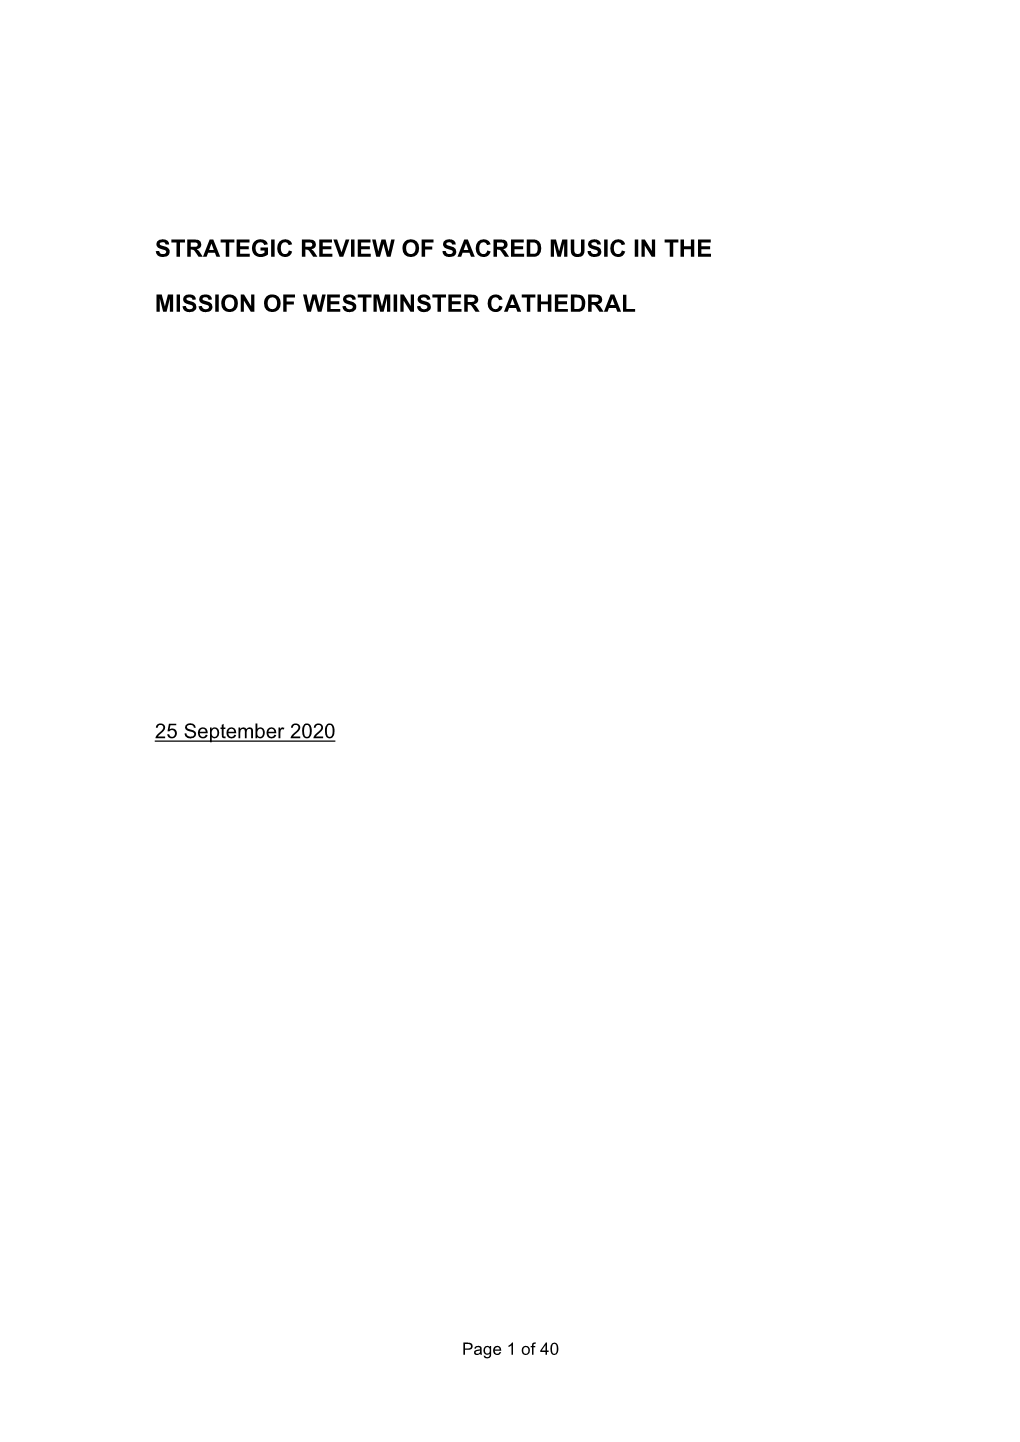 Strategic Review of Sacred Music in the Mission of Westminster Cathedral 25 September 2020, and to Provide Quarterly Reports to Him on Progress